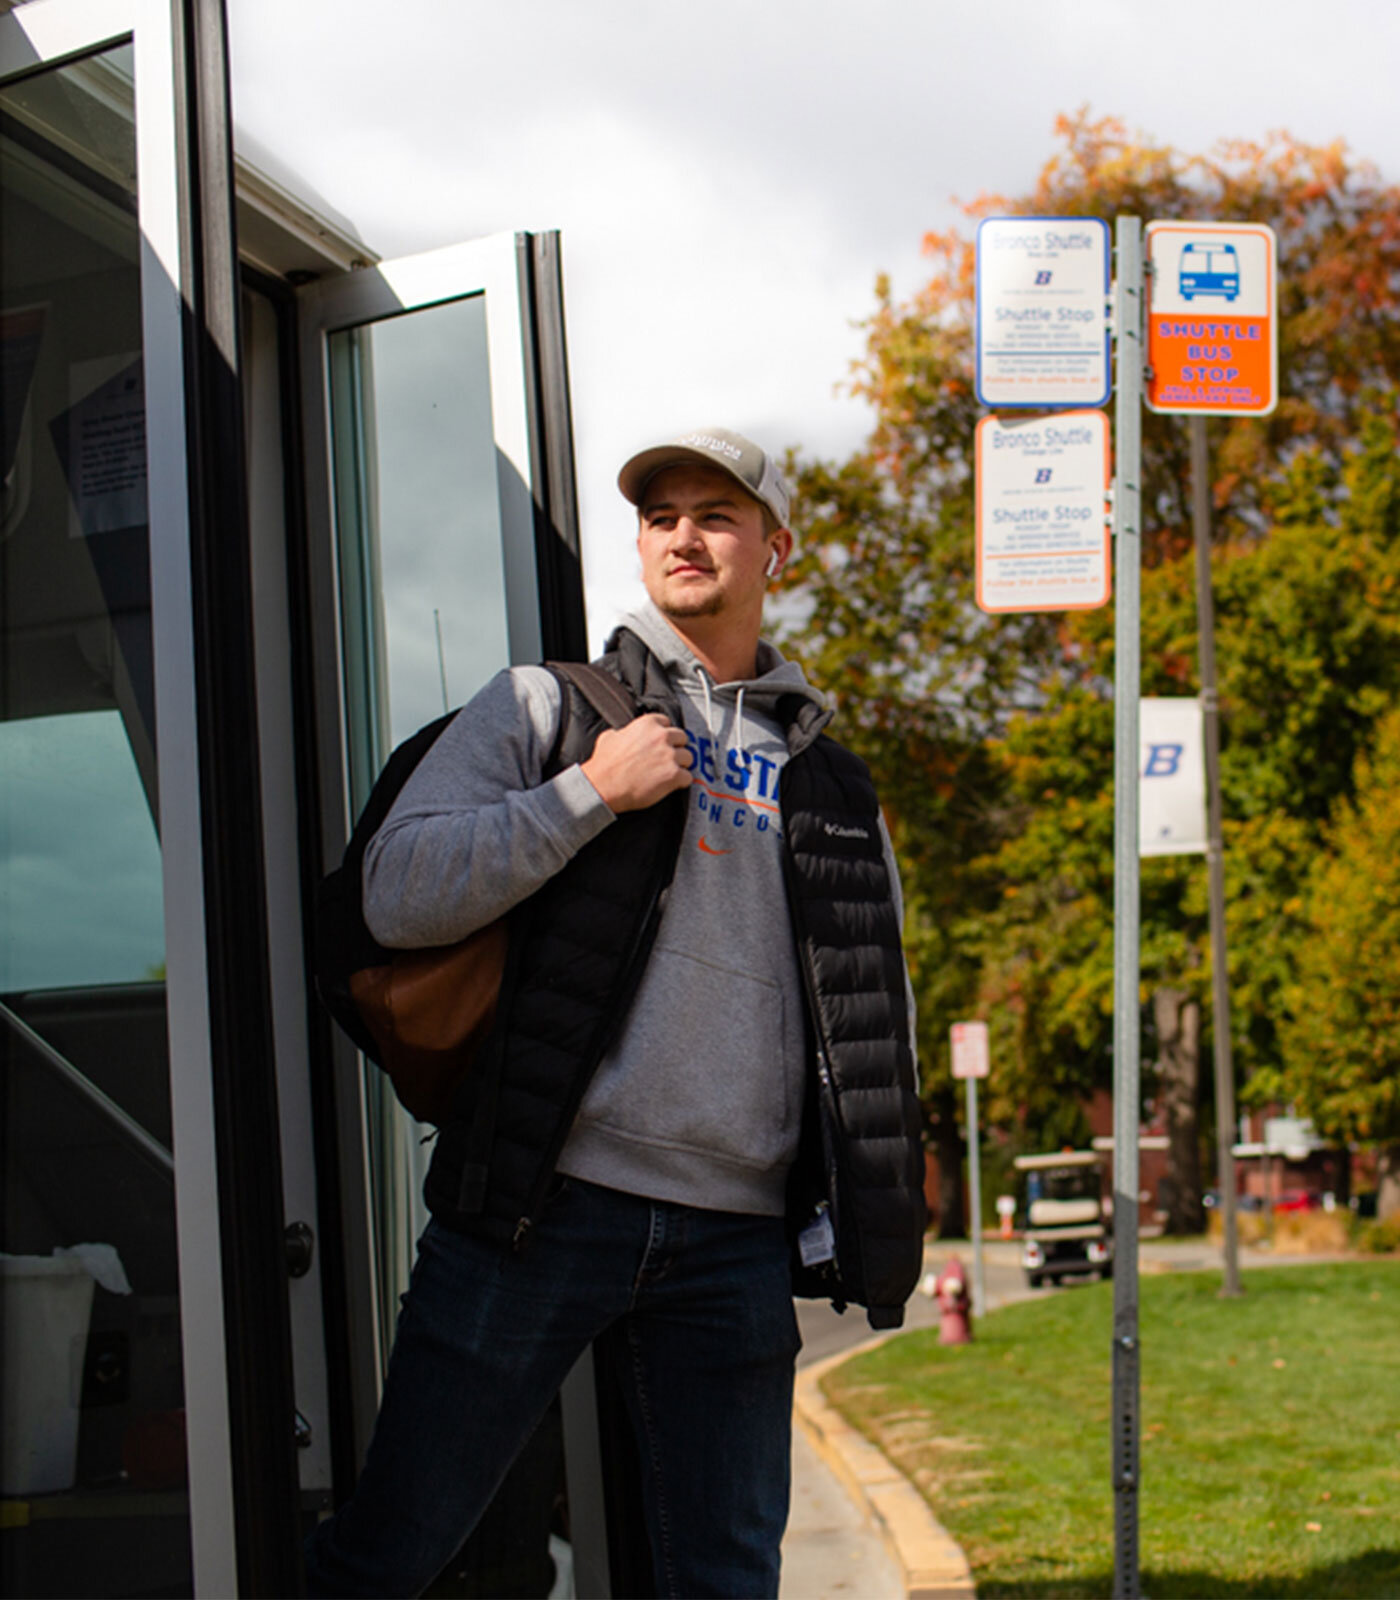 Boise State student getting off Bronco shuttle at a Boise bus stop